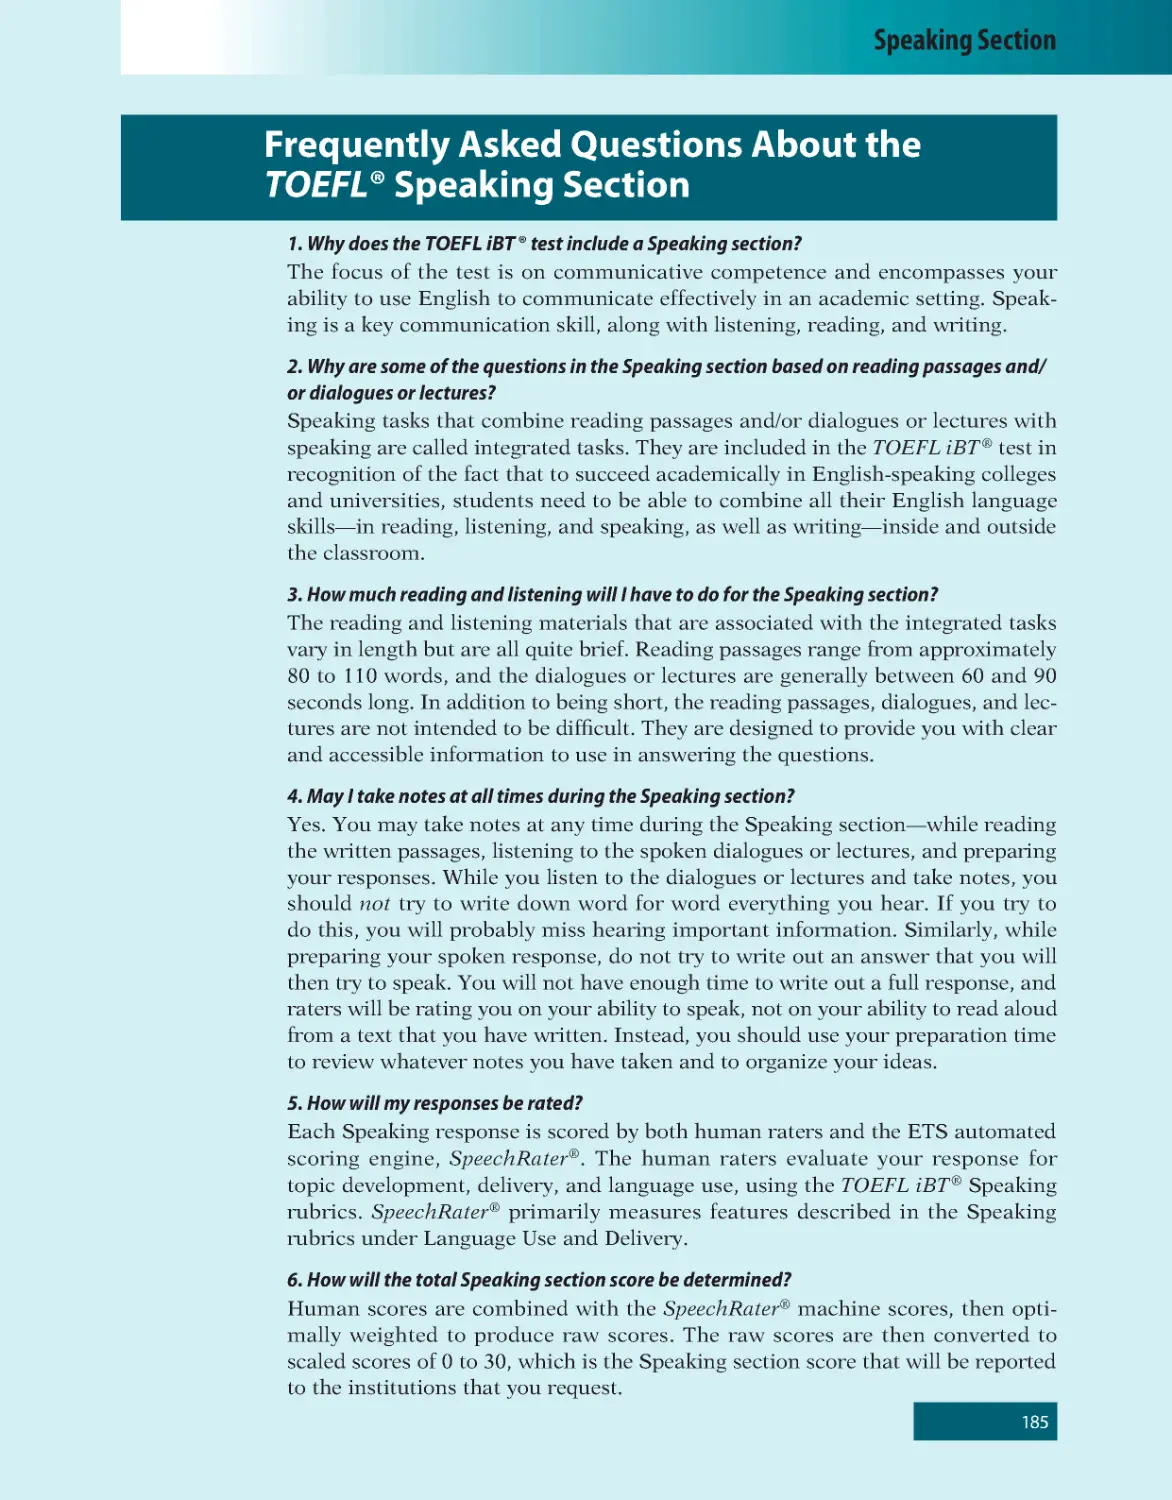 Frequently Asked Questions About the TOEFL® Speaking Section